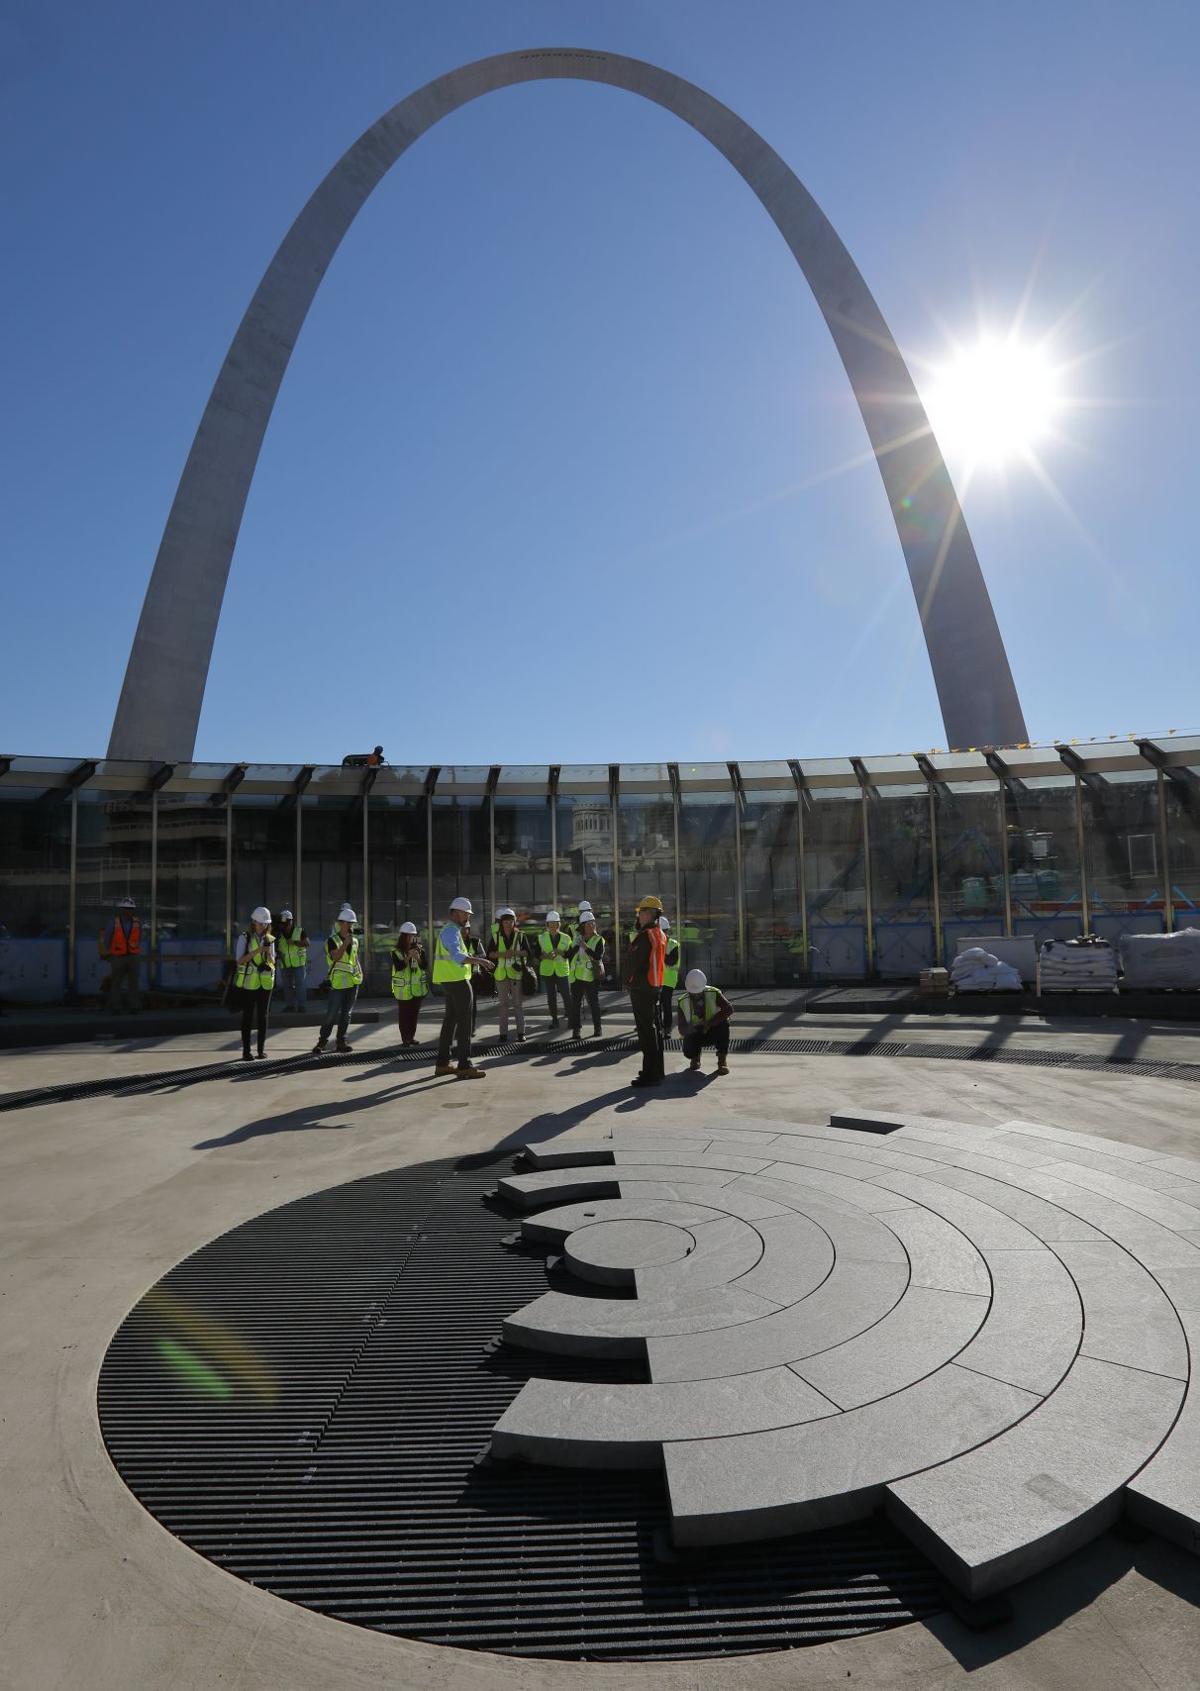 Gateway Arch museum, visitors center to open in time for Fair St. Louis | Hot List | 0